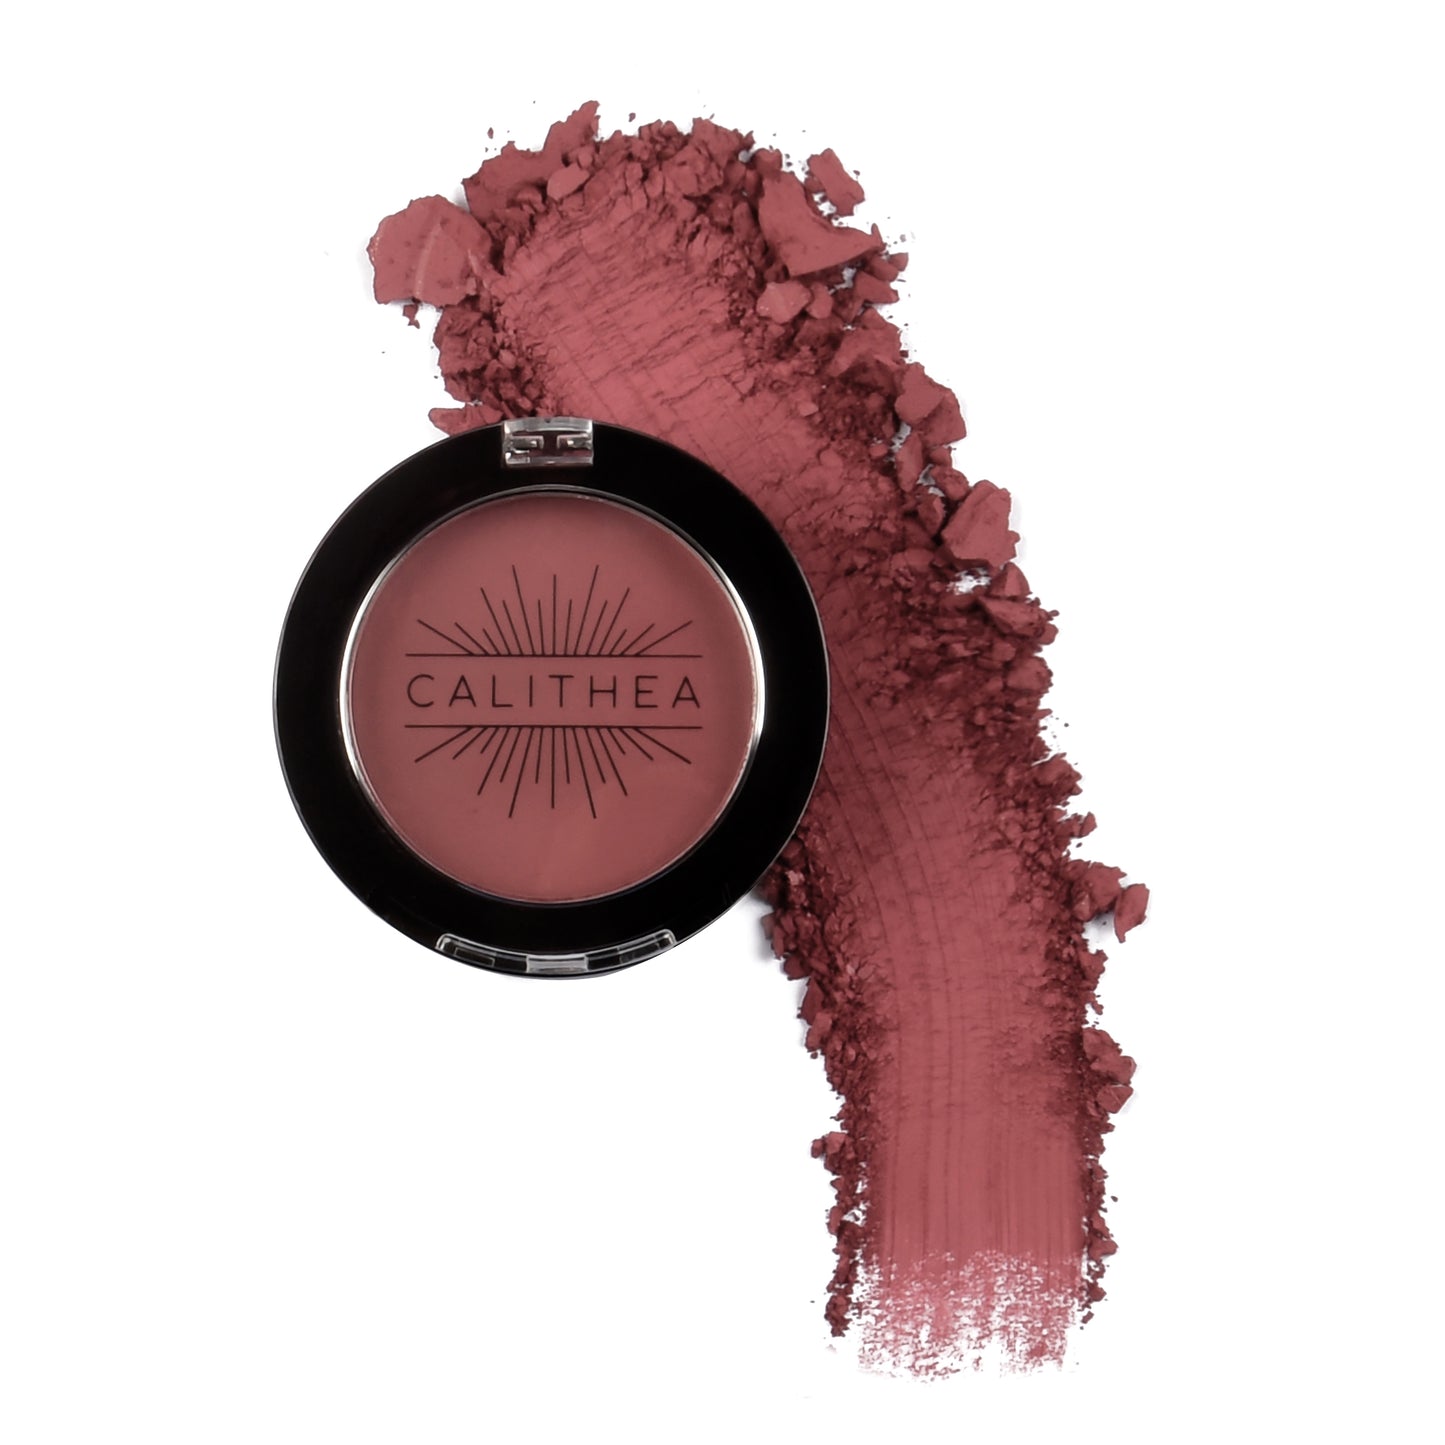 Pressed Powder Blush by Calithea.co